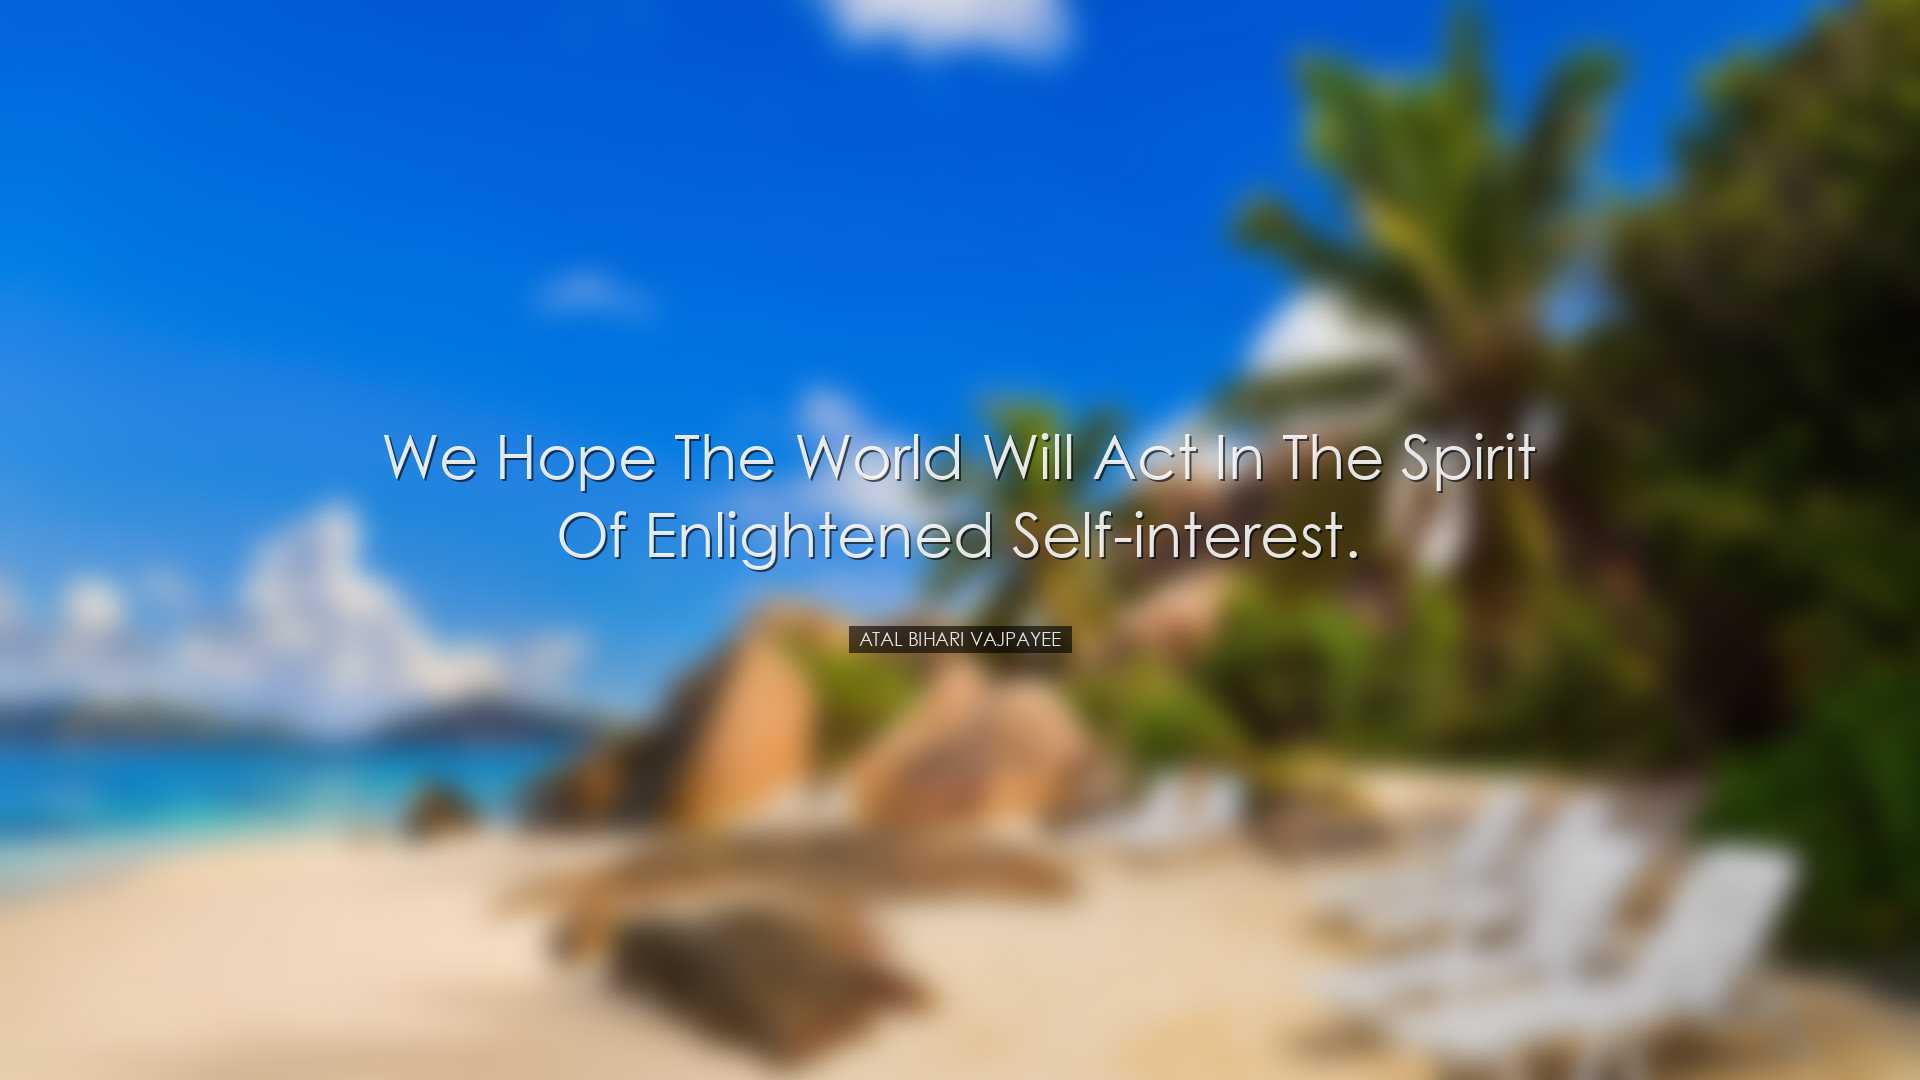 We hope the world will act in the spirit of enlightened self-inter